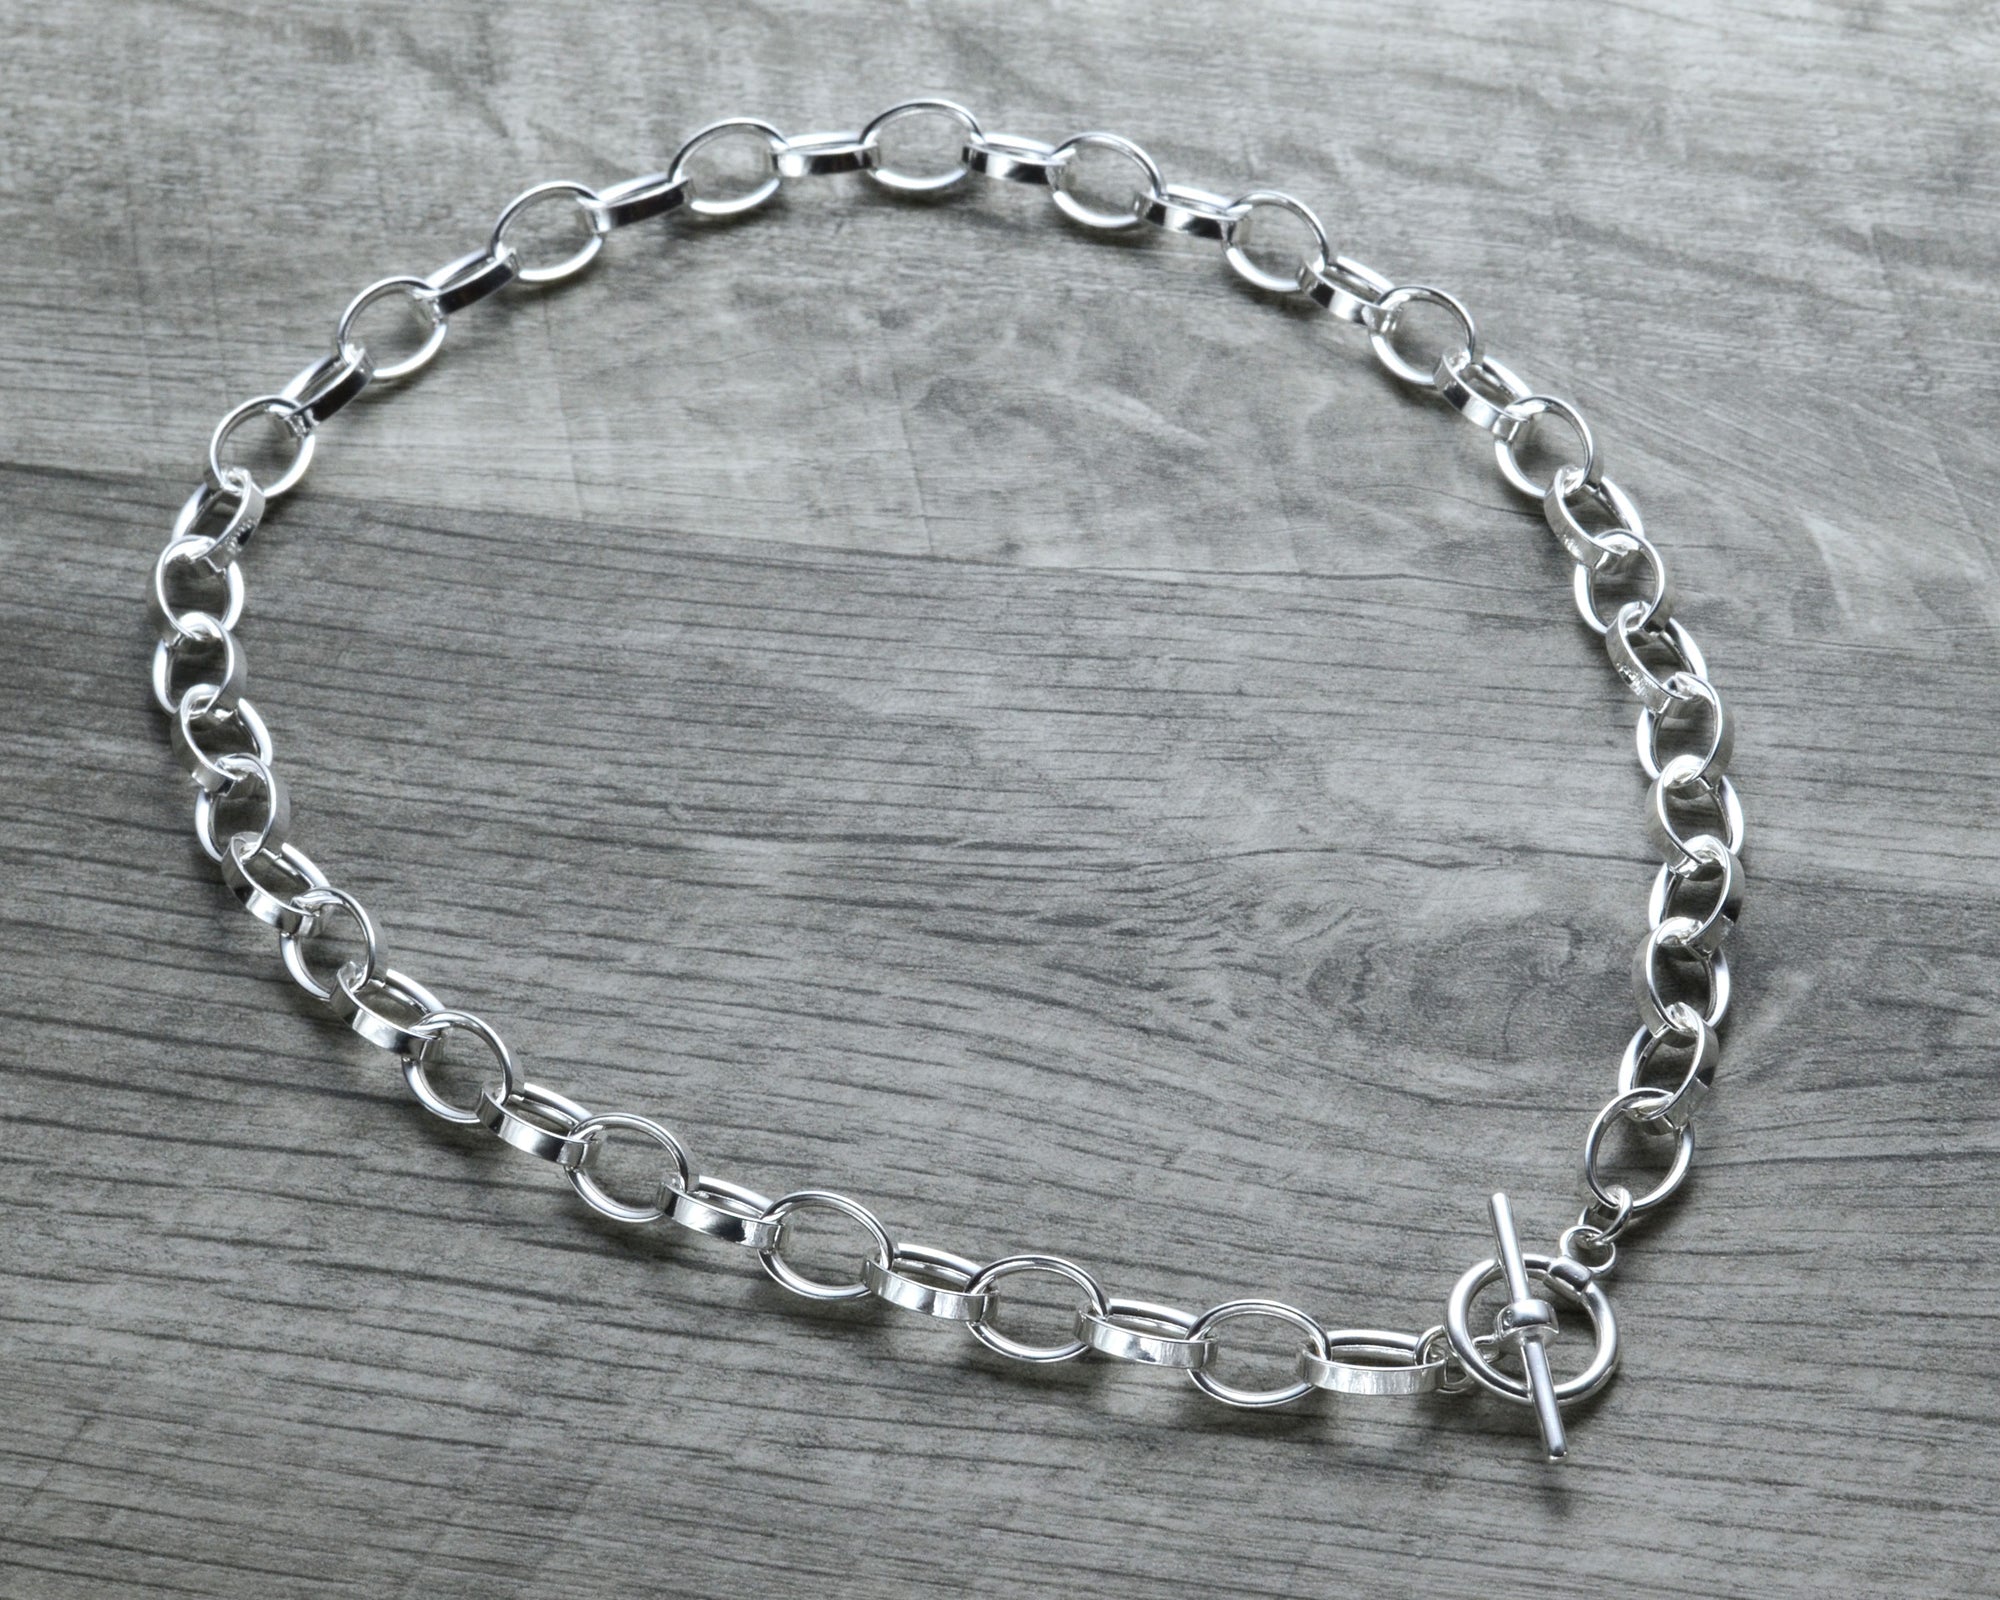 Chunky choker necklace in sterling silver